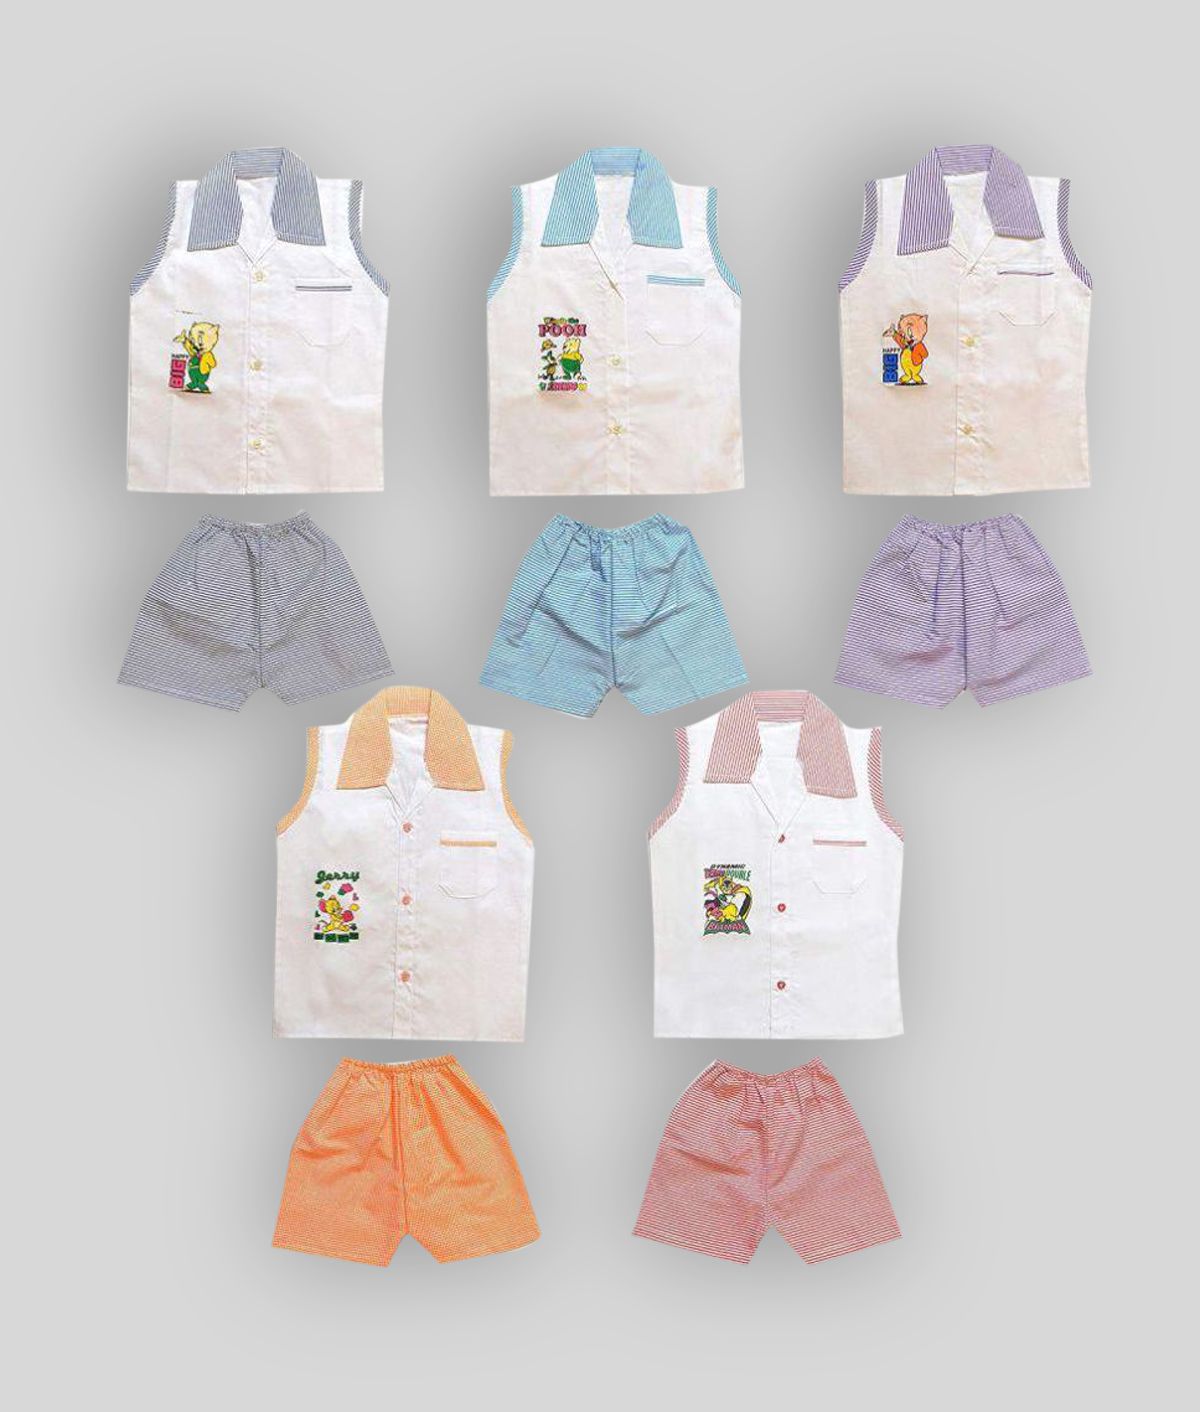 Sathiyas Baby Boys Printed Sleevless Tops & Striped Drawers - Pack of 5 Sets (6-12 Months)